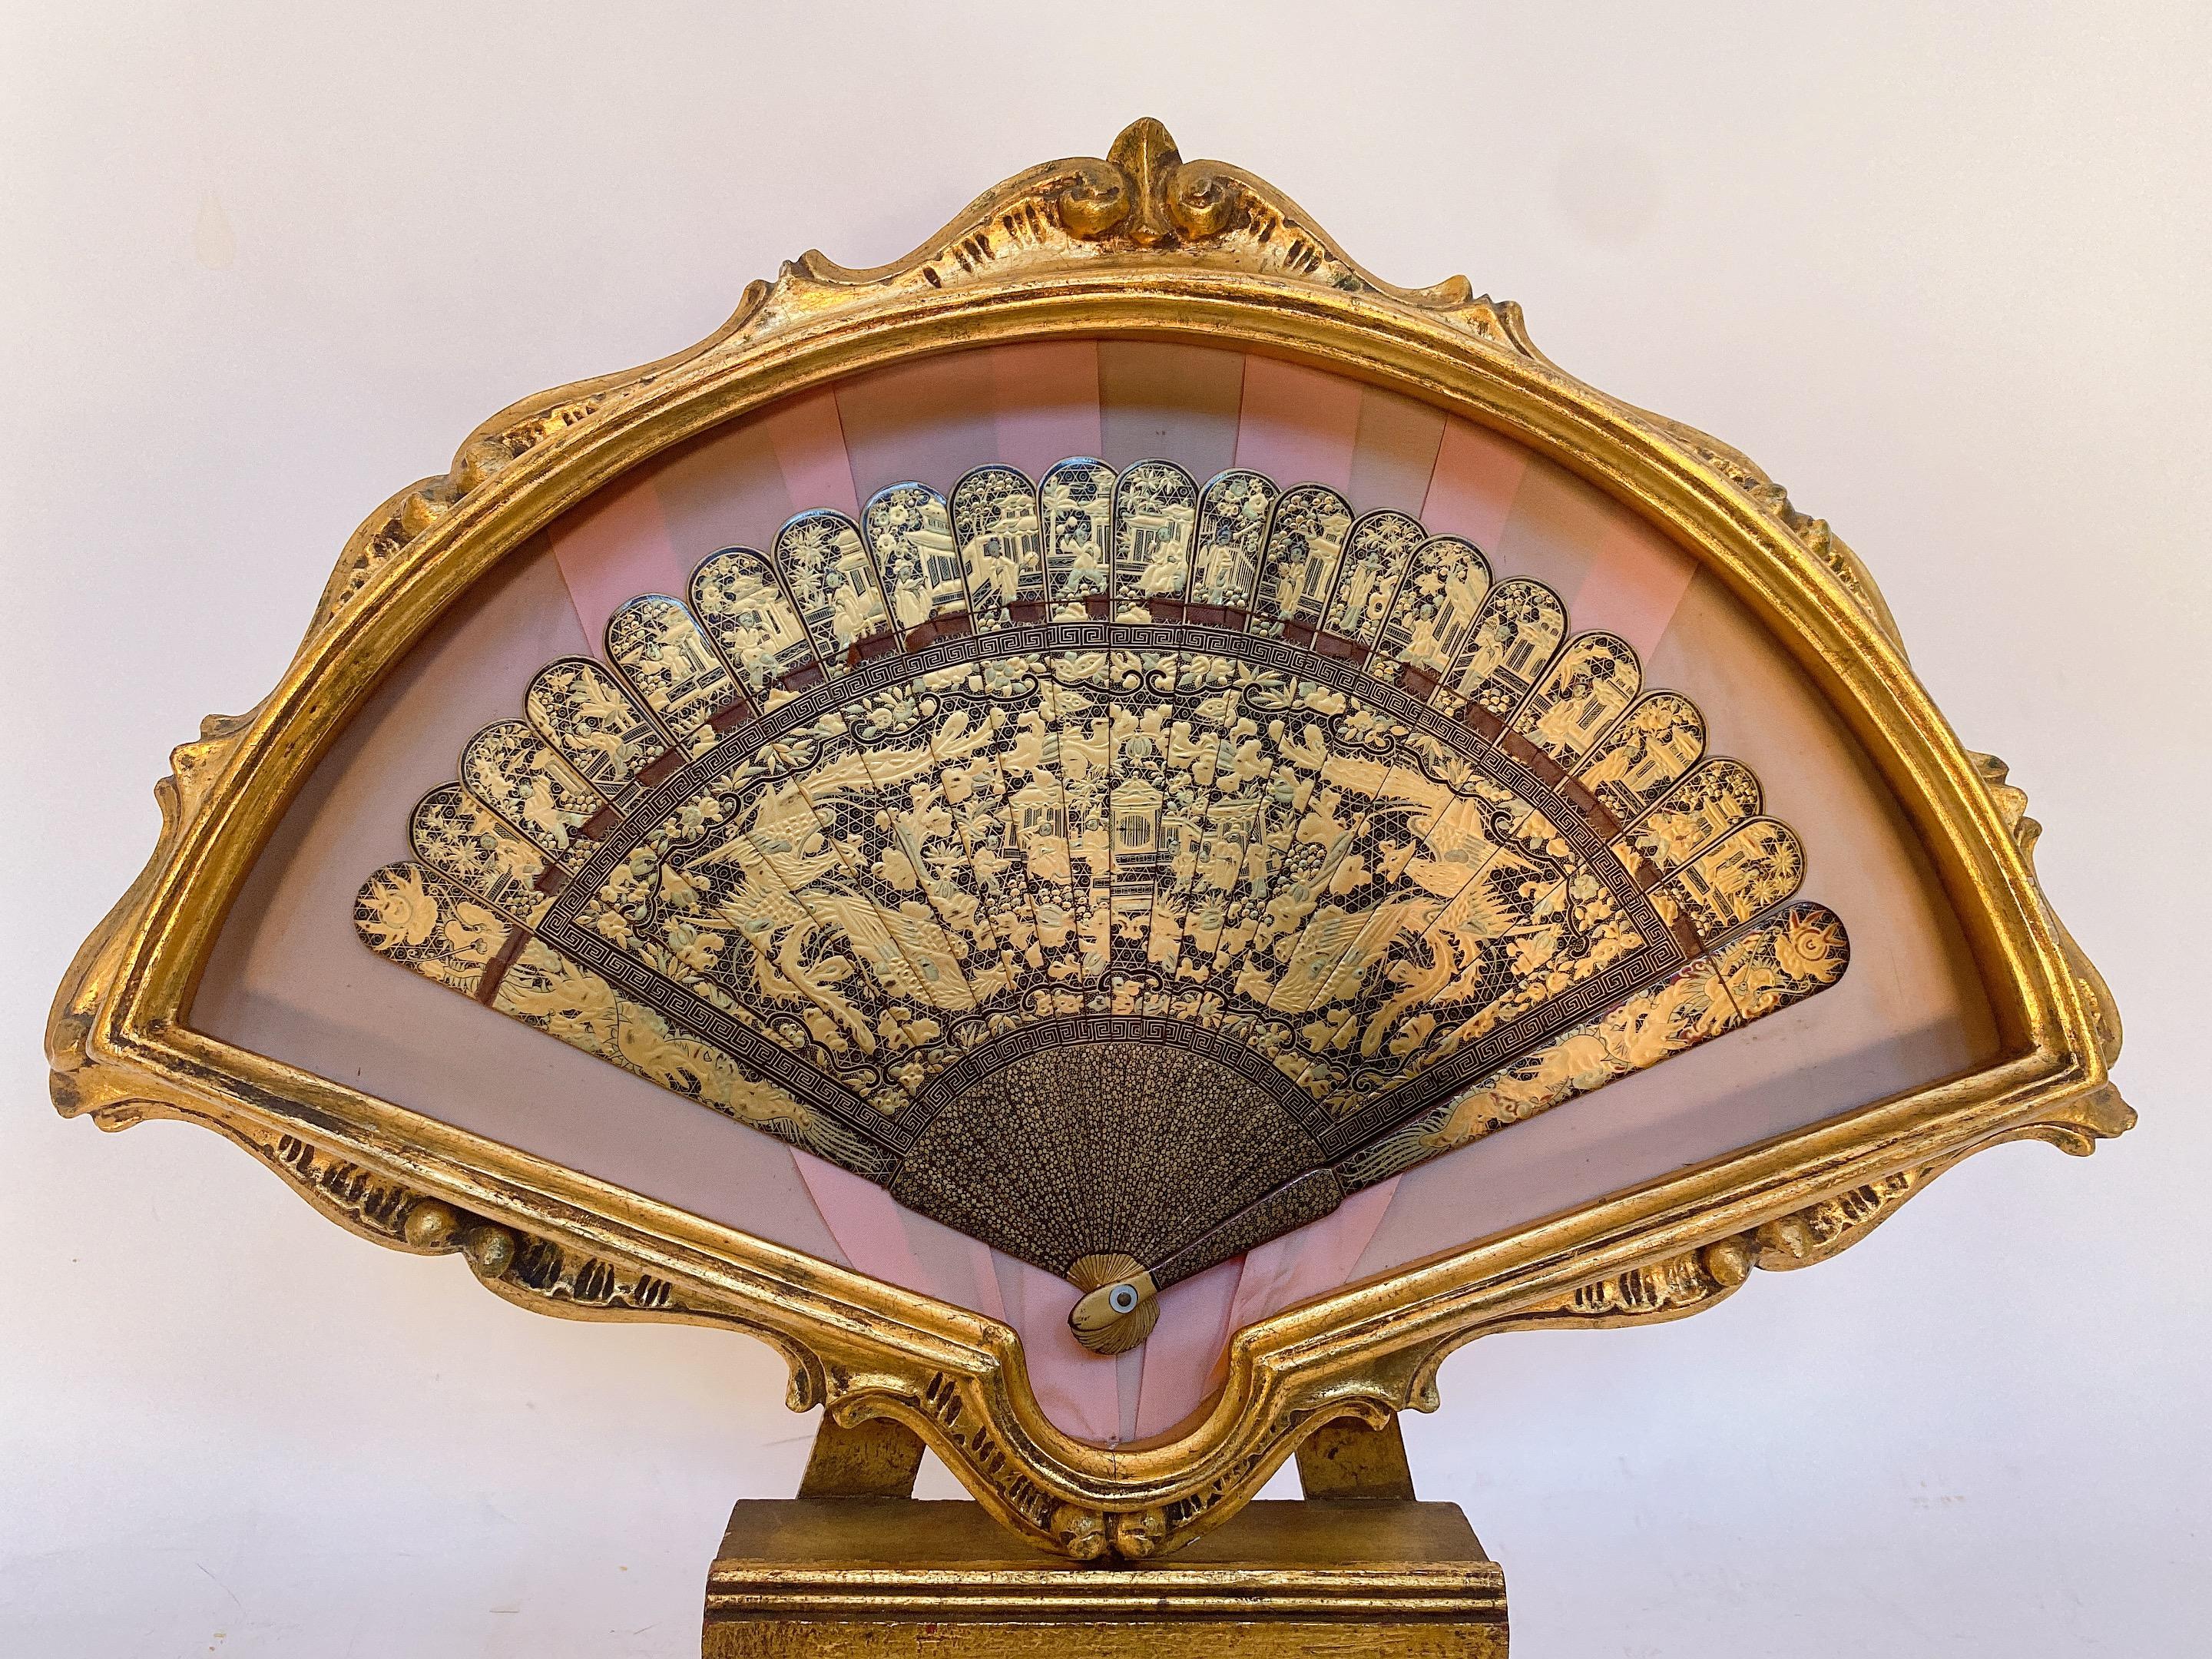 19th Century antique Chinese hand painted gold lacquer scene gilt fan 100 faces with original wood case and stand, fan is 13 inch x 8 '', the fan in case is 17'' x 12.5 ''x 2 inch.
Very beautiful piece, case no glass.